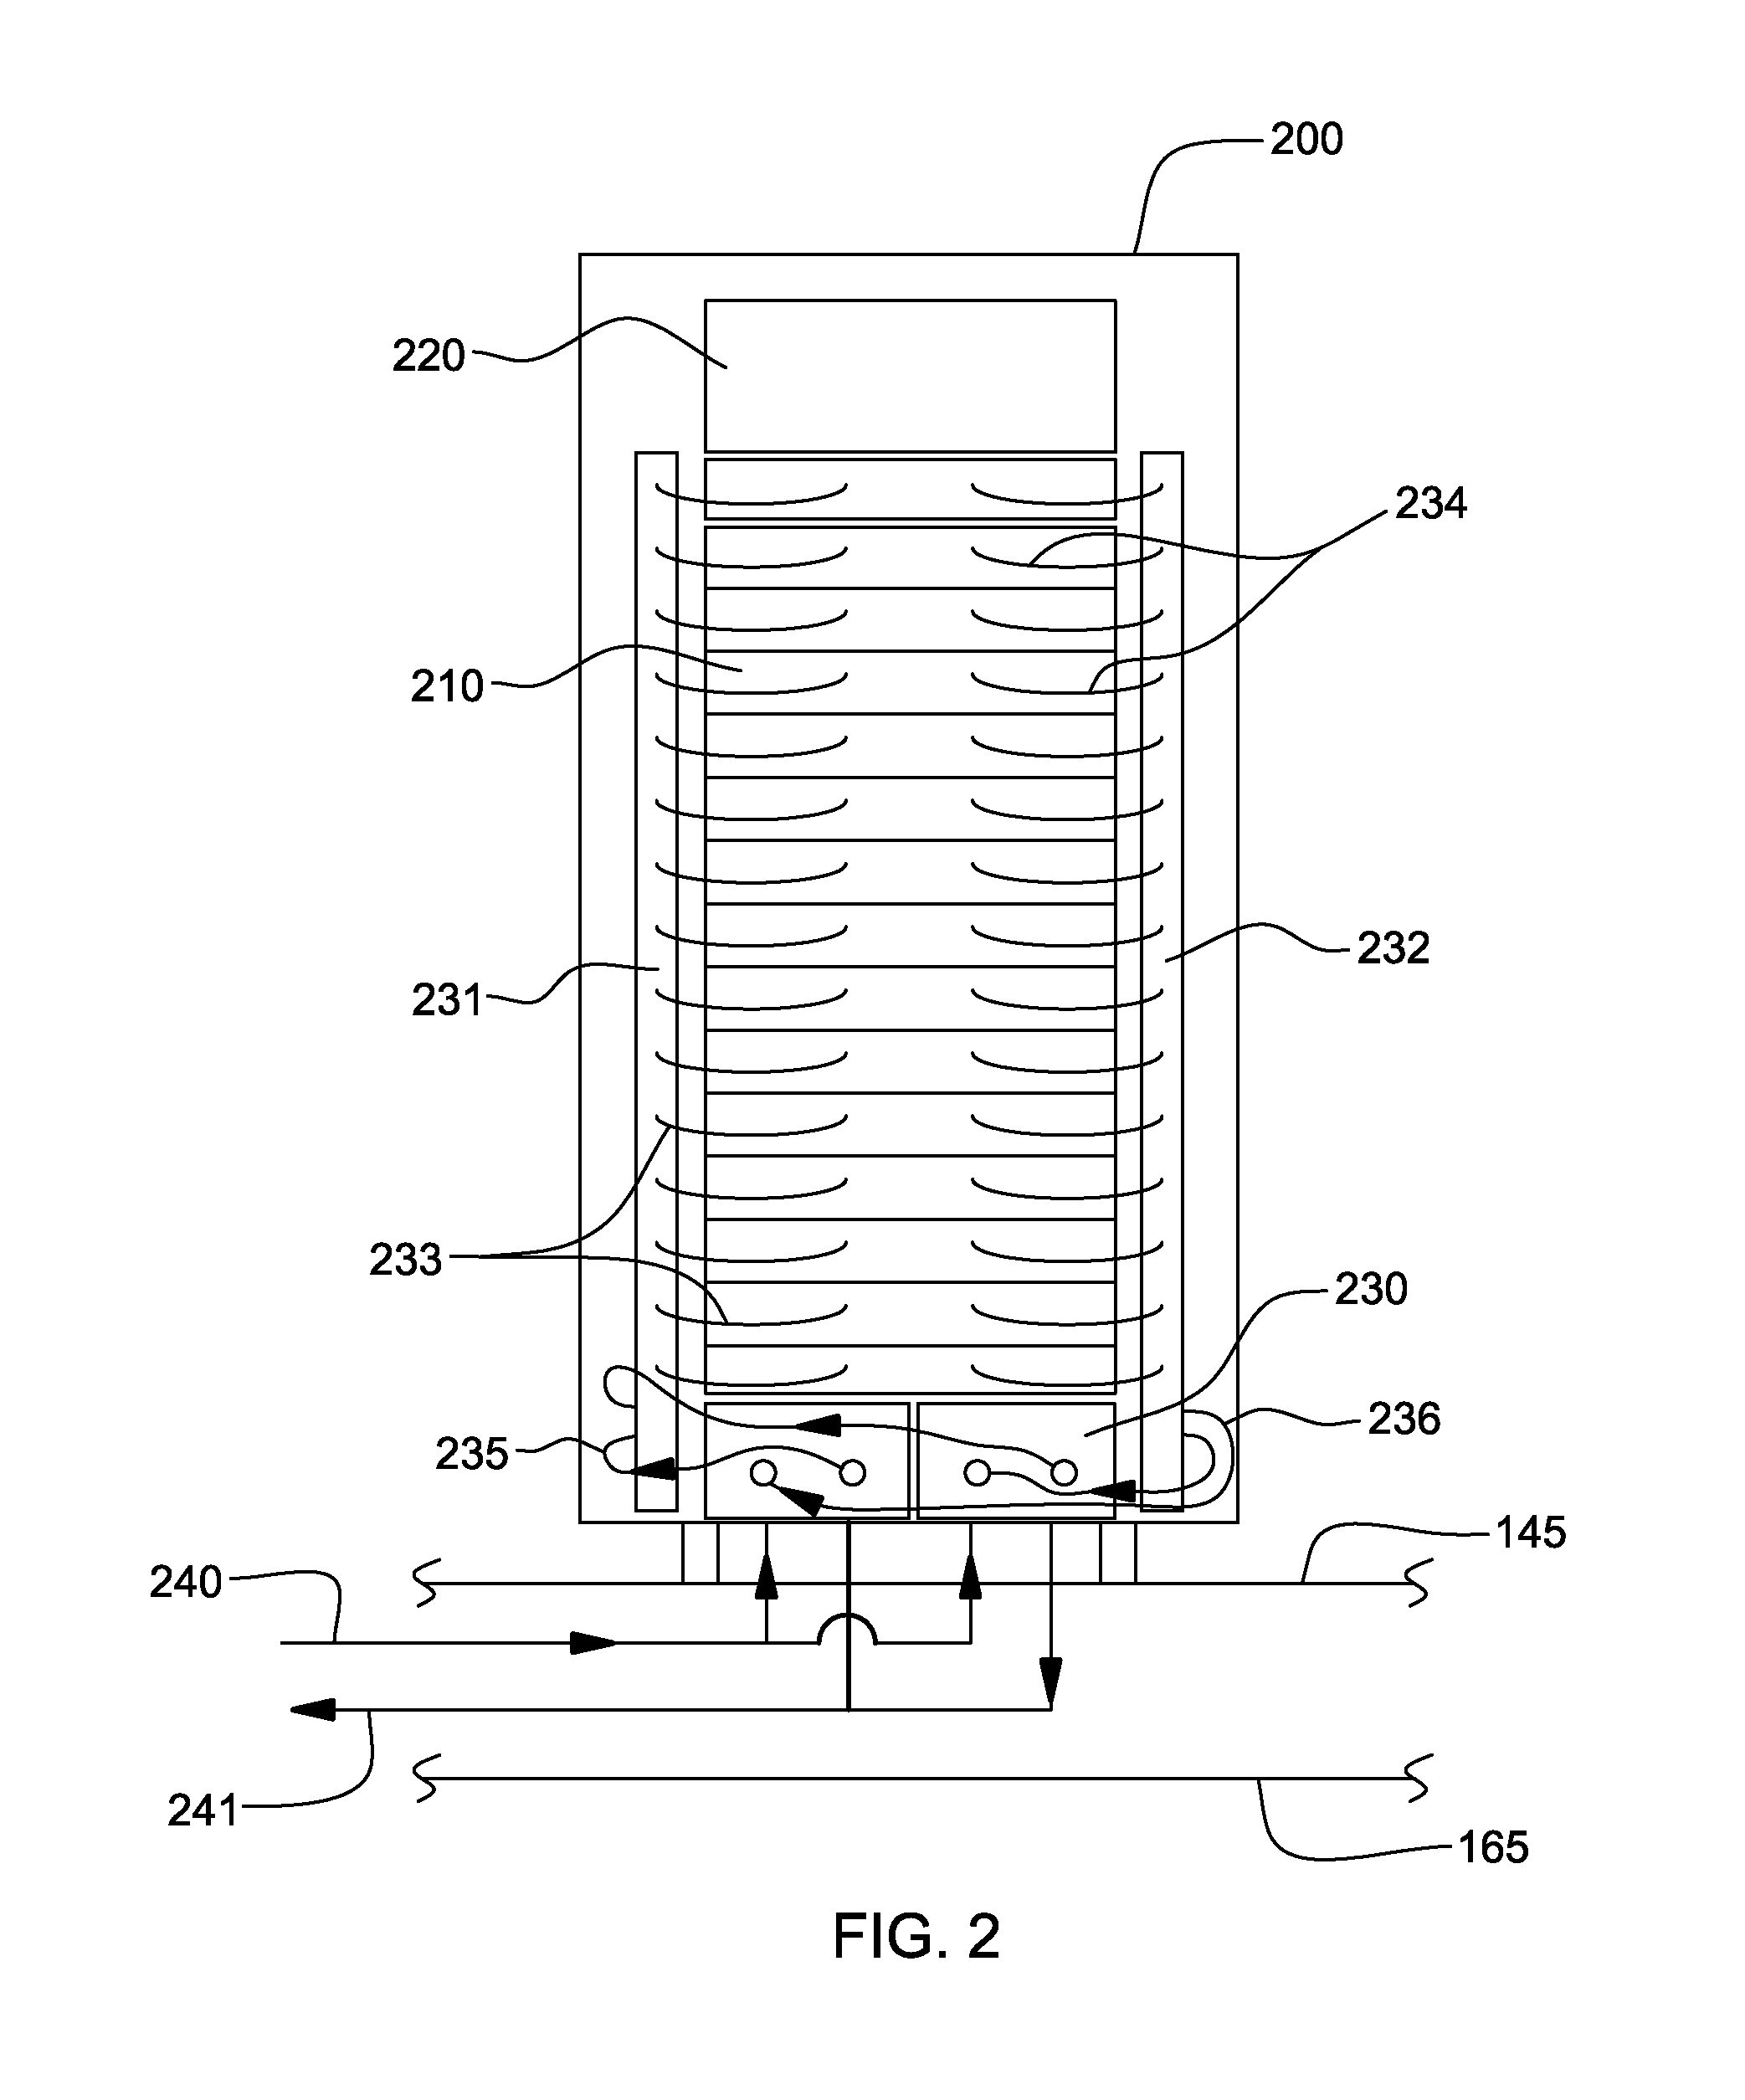 Immersion-cooled and conduction-cooled method for electronic system